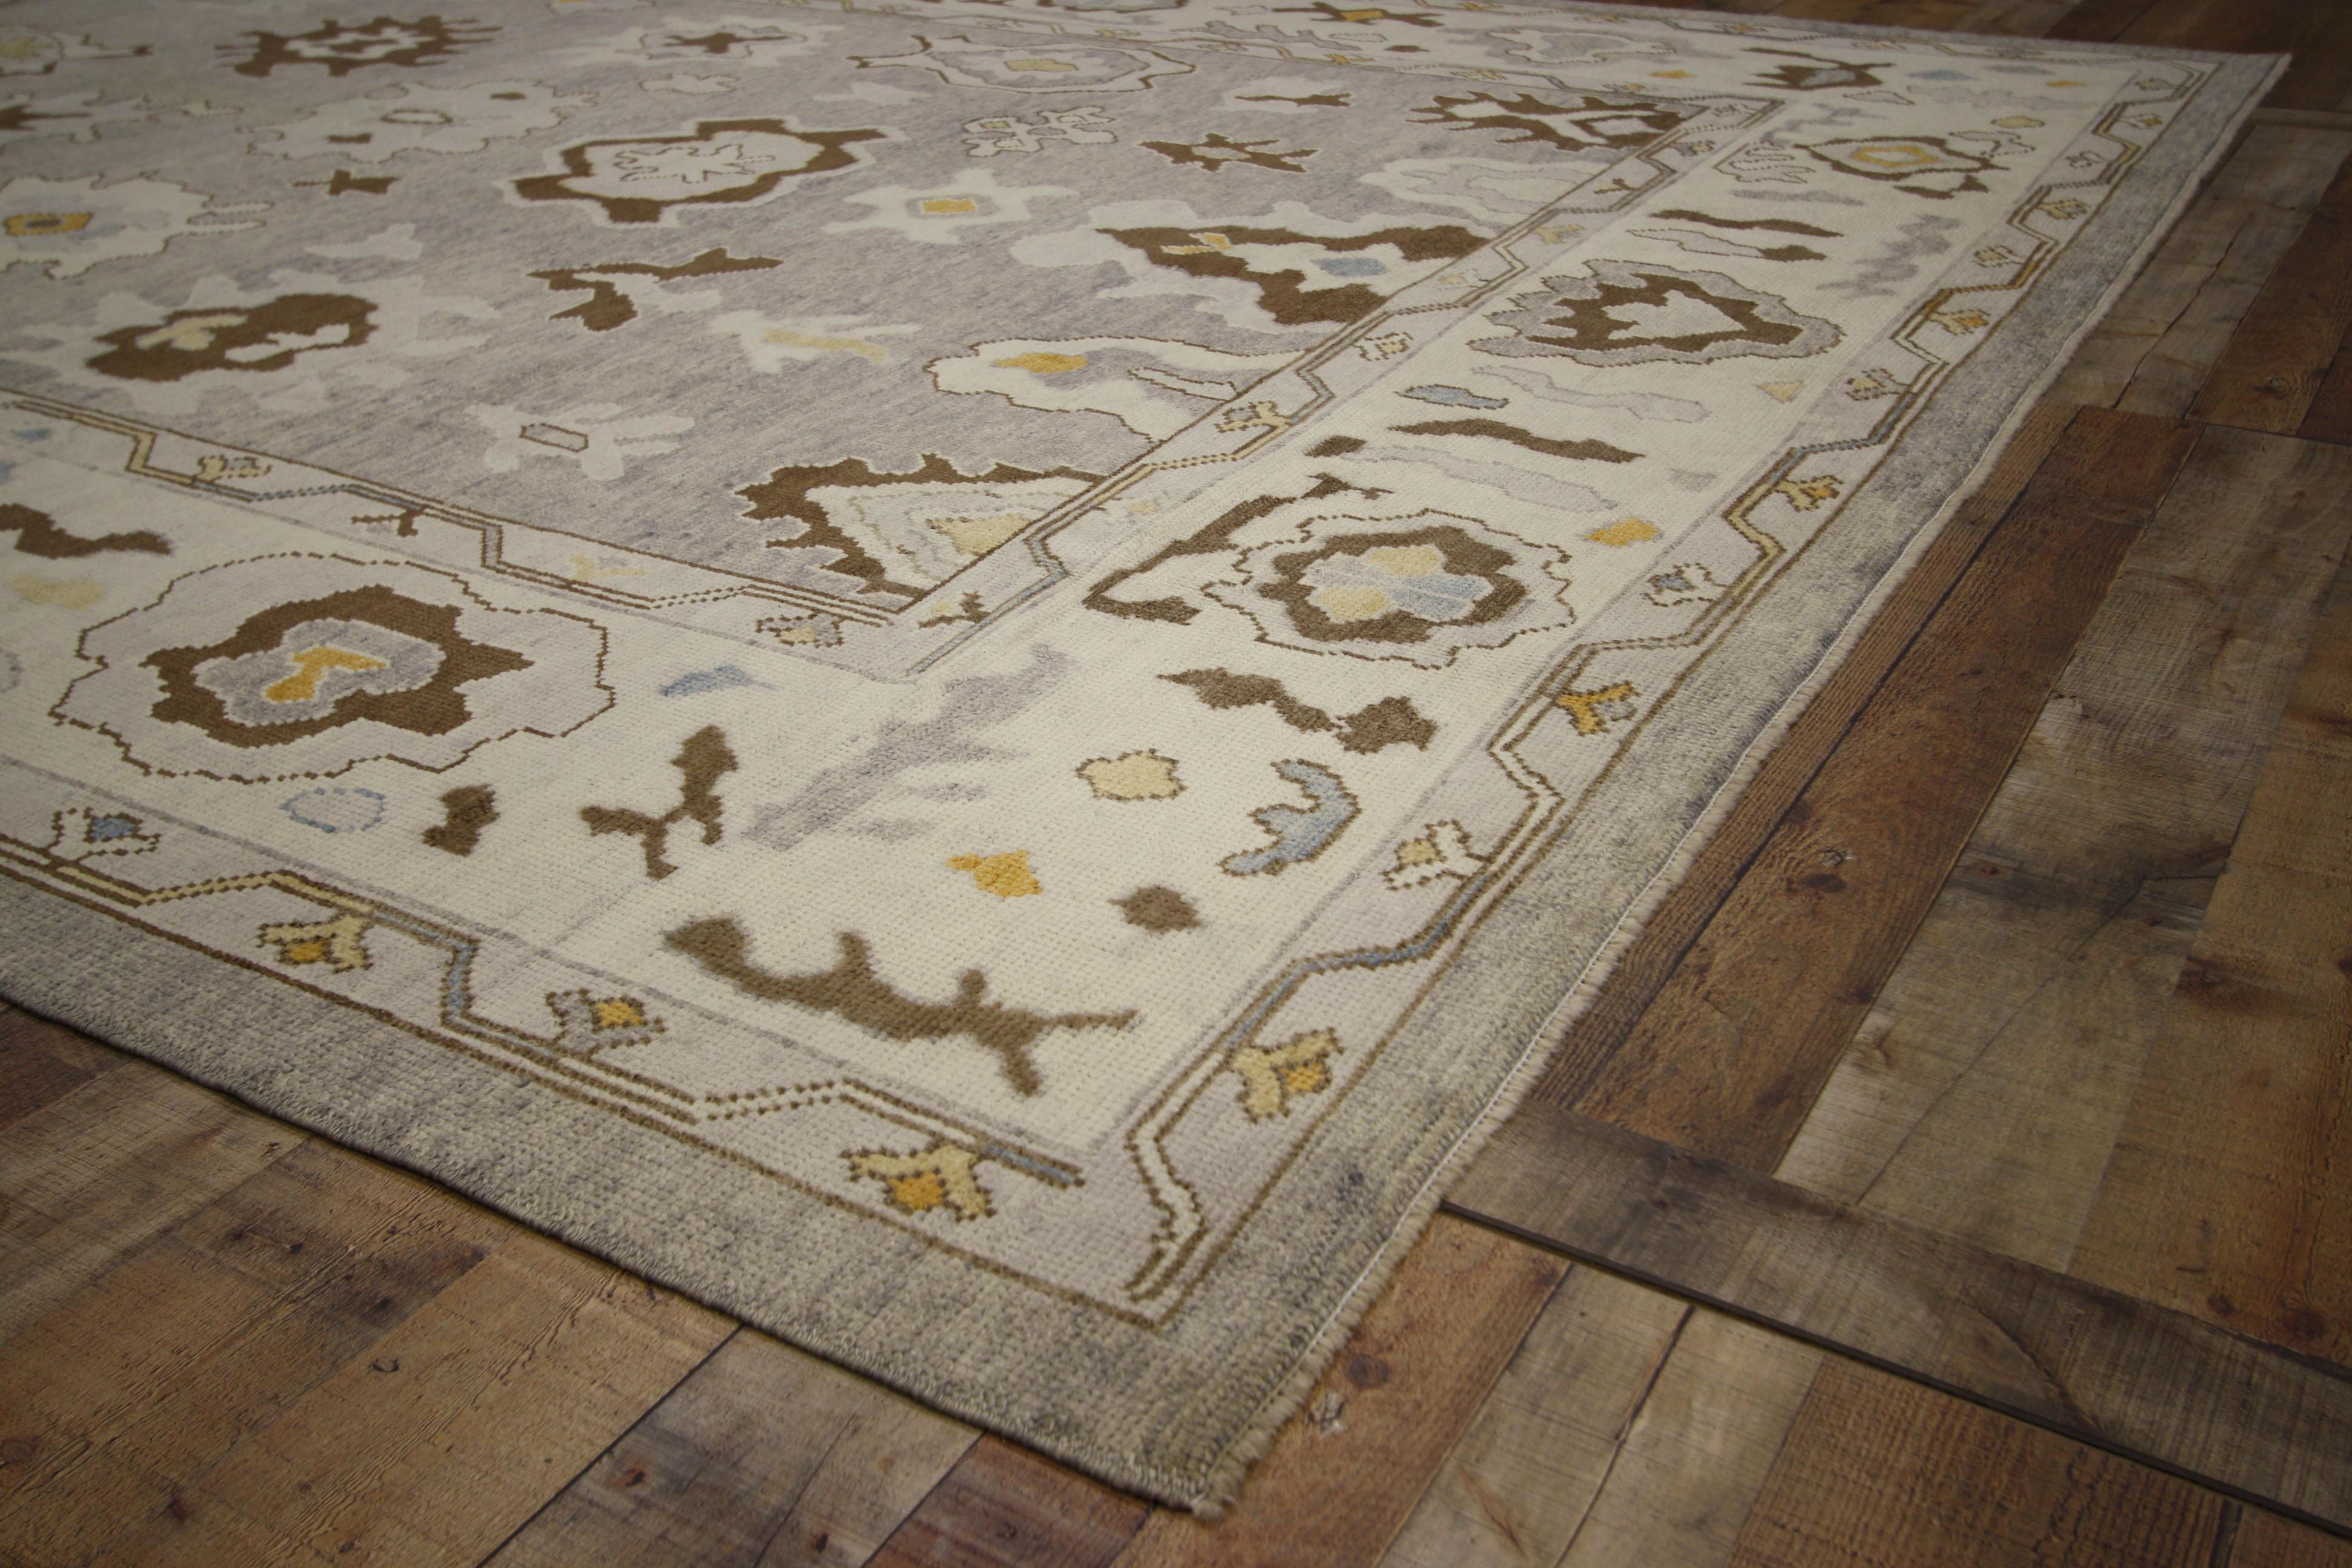 52360 New Turkish Oushak Area Rug with Neutral Colors 09'08 x 12'06. Classic, calm and cozy, this hand-knotted wool Turkish Oushak area rug features a large-scale geometric pattern of palmettes and abstract shapes on an abrashed gray field. It is